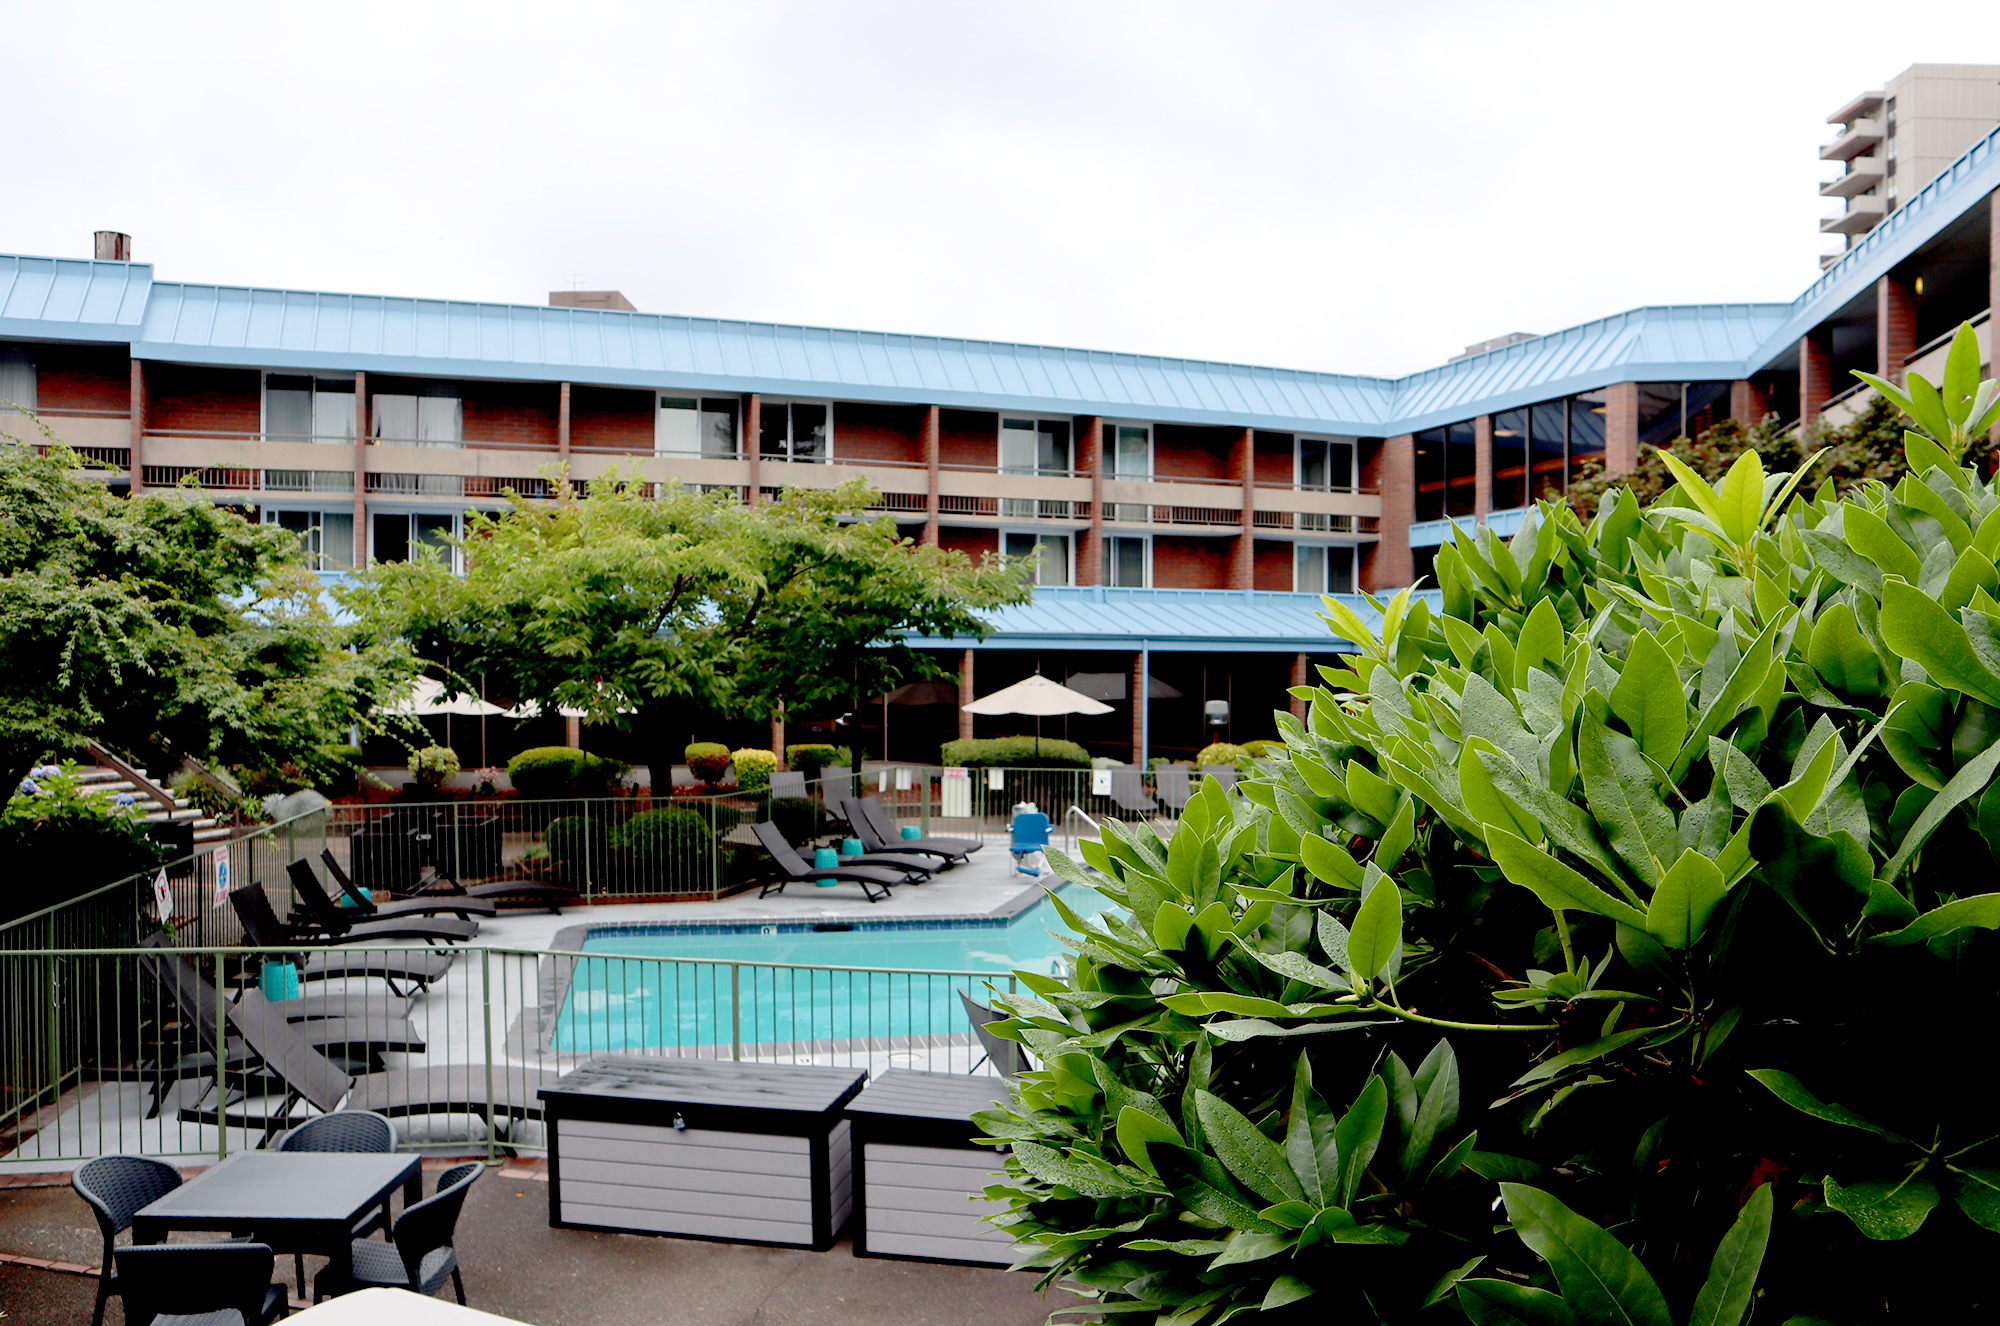 University Place Hotel offers lodging with an outdoor pool near campus.